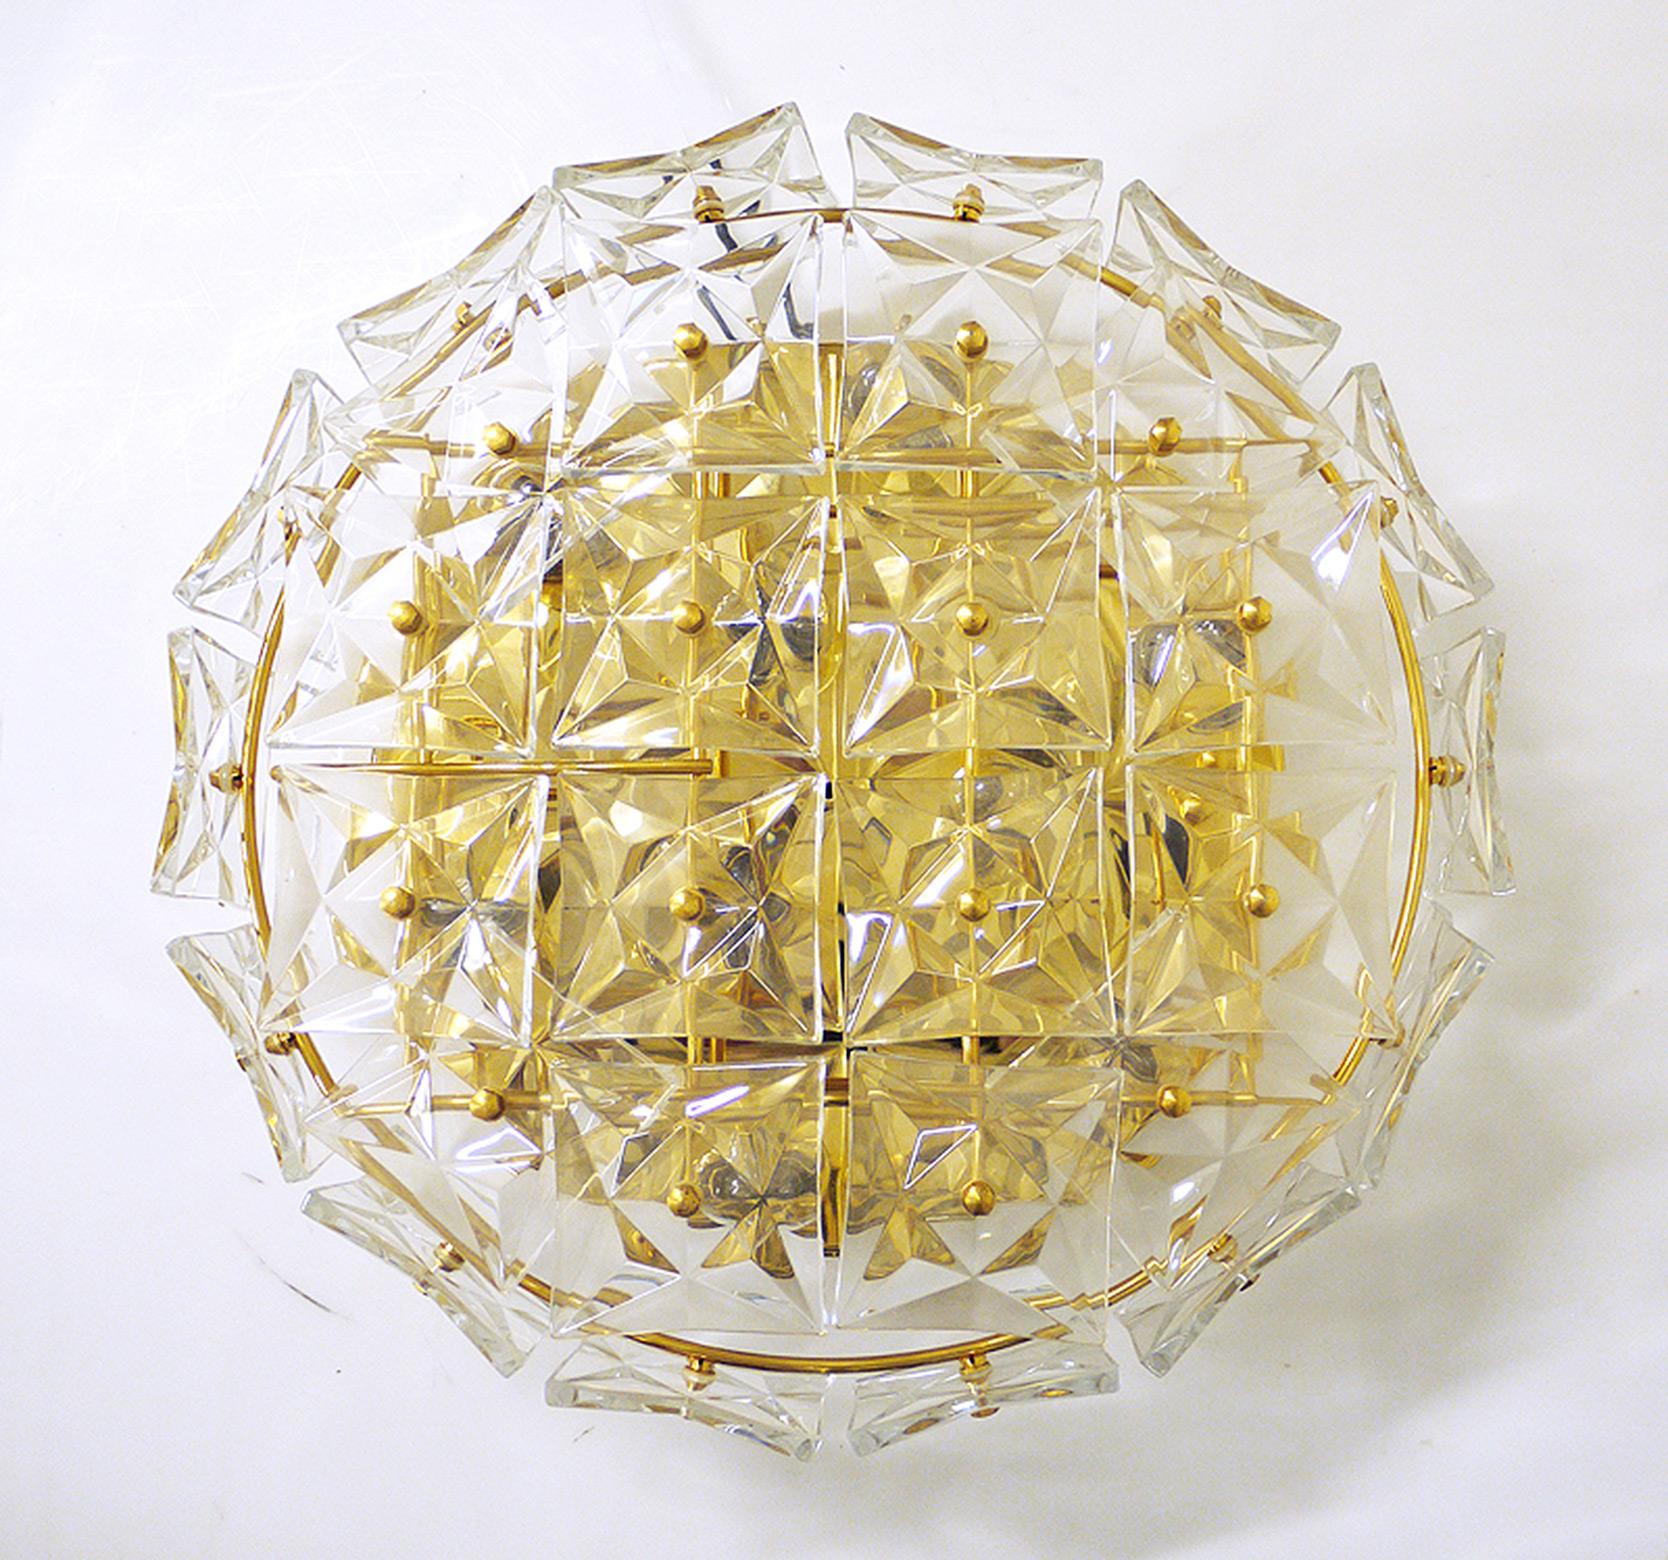 Elegant large flush mount with faceted crystal glass on a gold-plated brass frame. Manufactured by Kinkeldey, Germany in the 1960s. 

Measures: diameter 20“ in. (50 cm), height 6“ in. (15 cm). 
Lighting: takes nine small Edison E14 base screw bulbs.